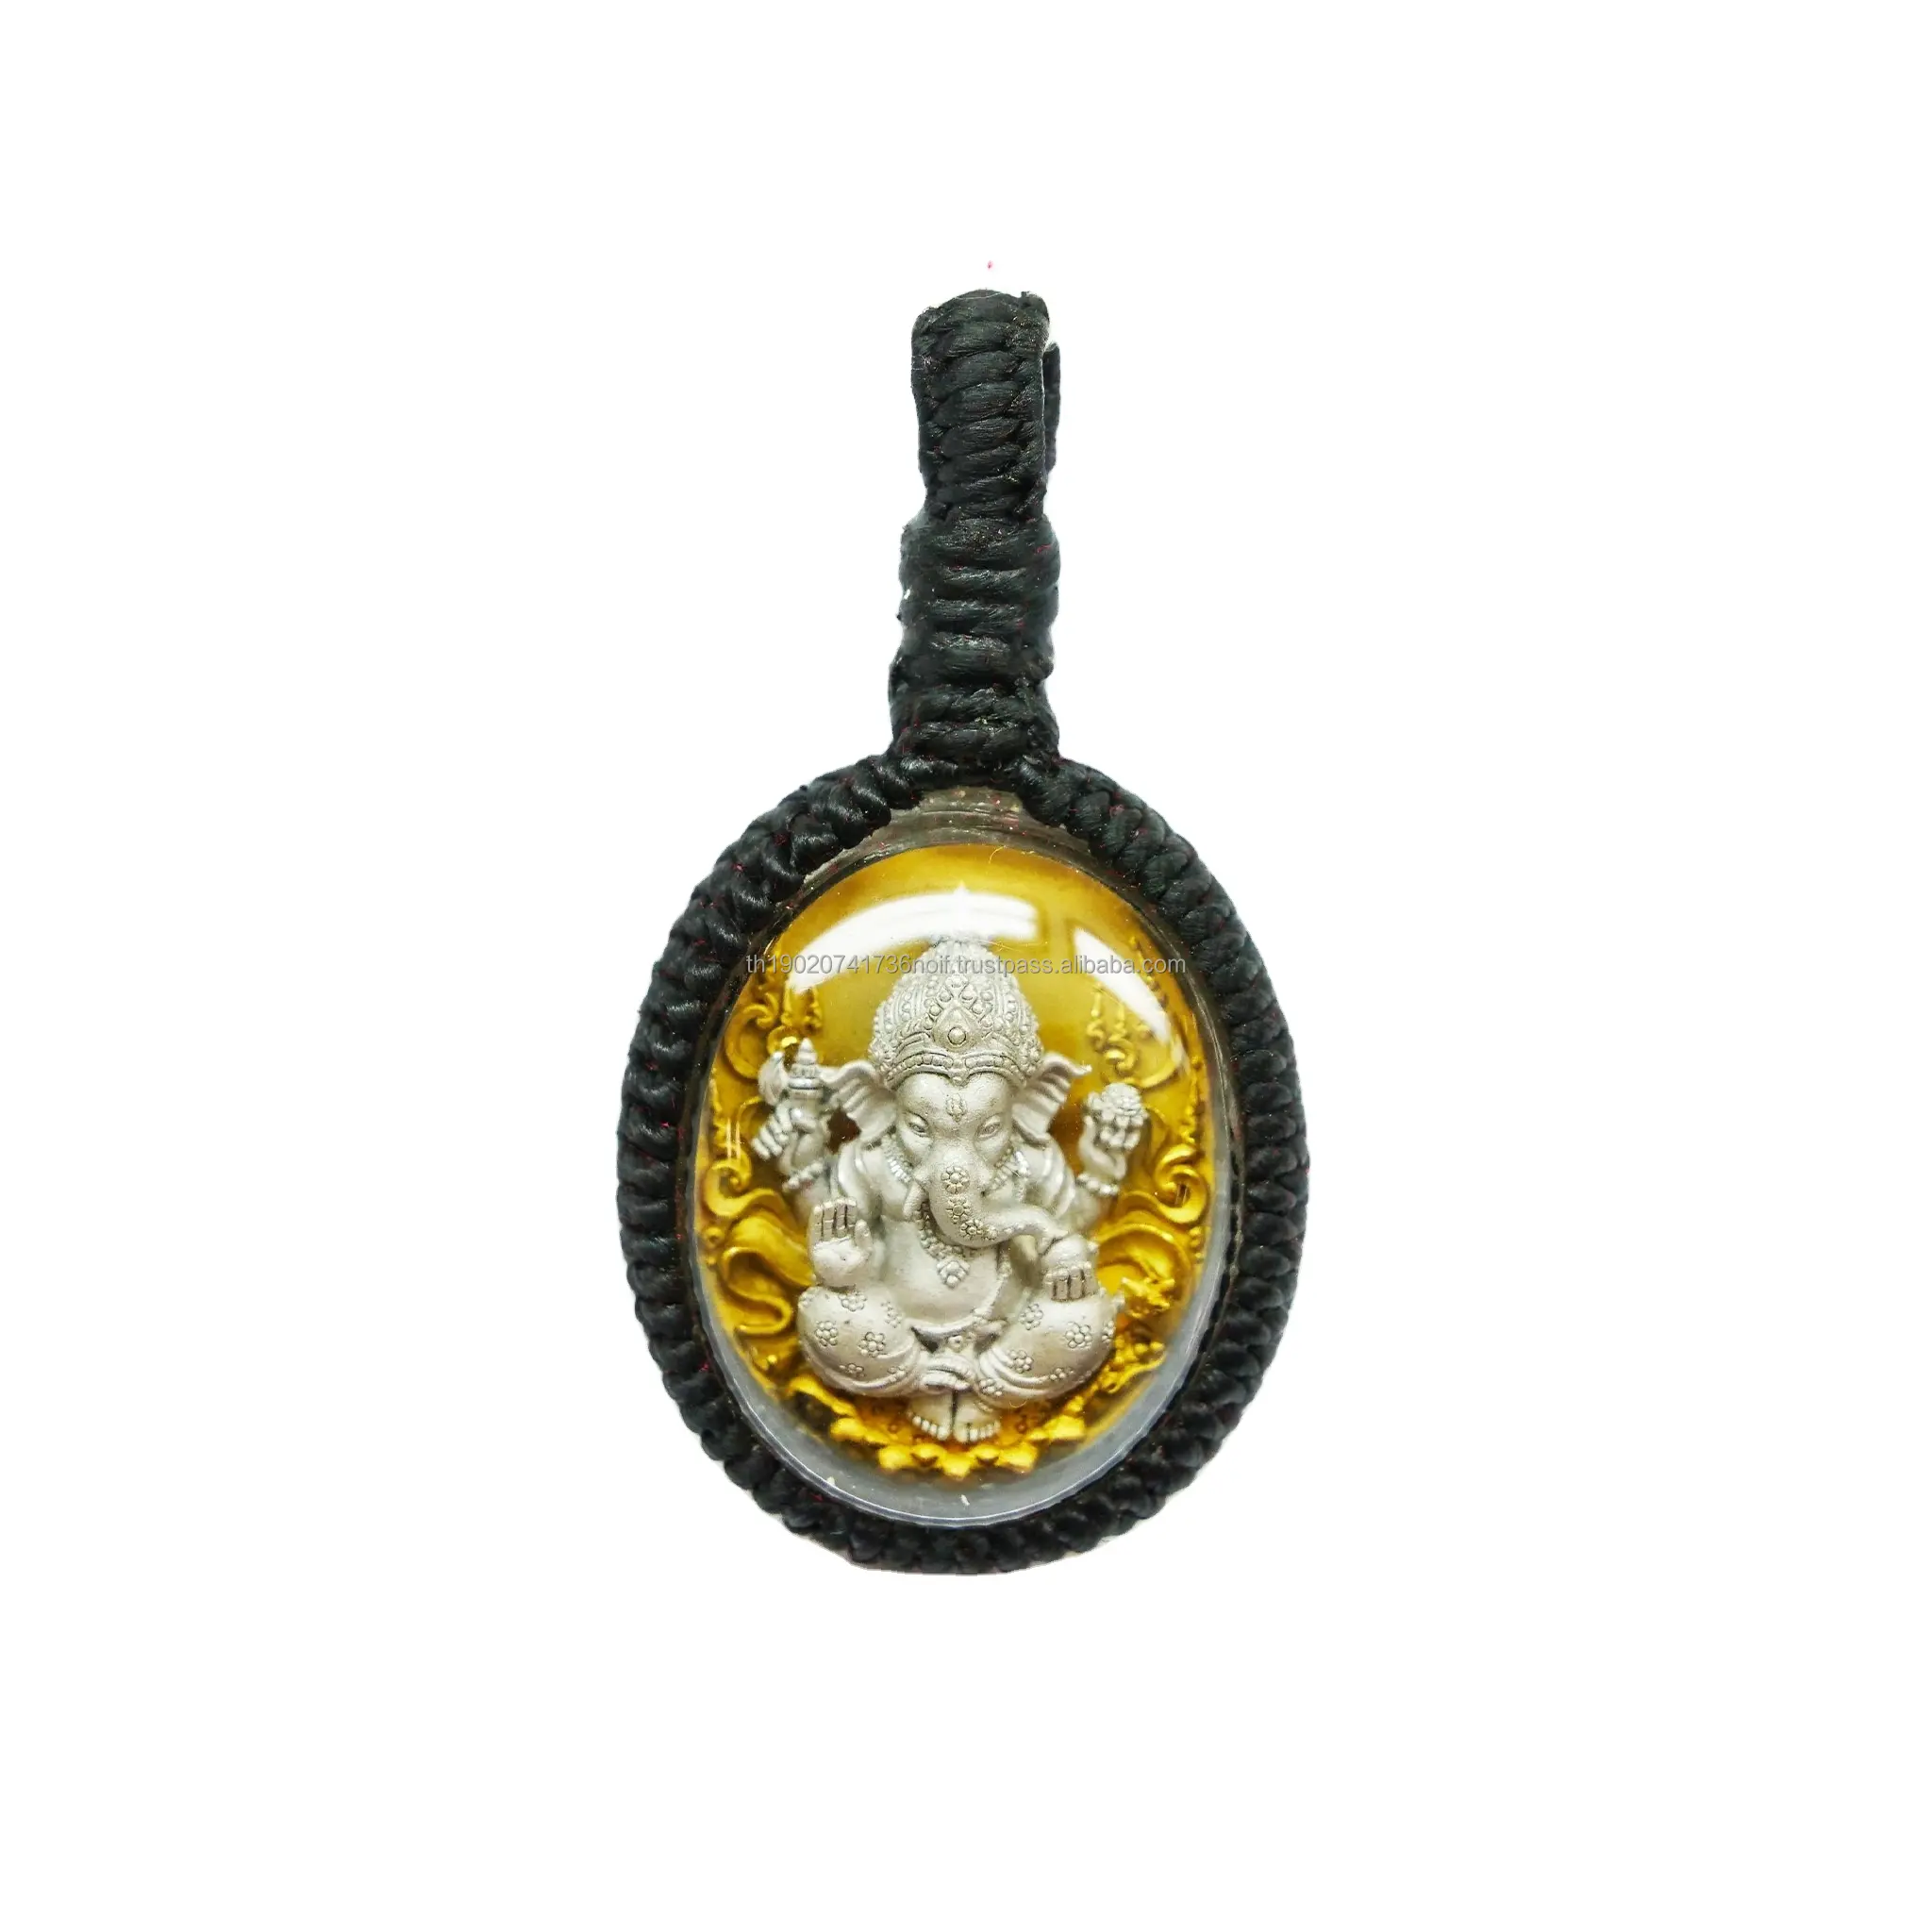 RARE Ganesha Amulet from Thailand (Phra Phiknet) by A Thai Well-known National Artist, Chalermchai K. Limited Edition